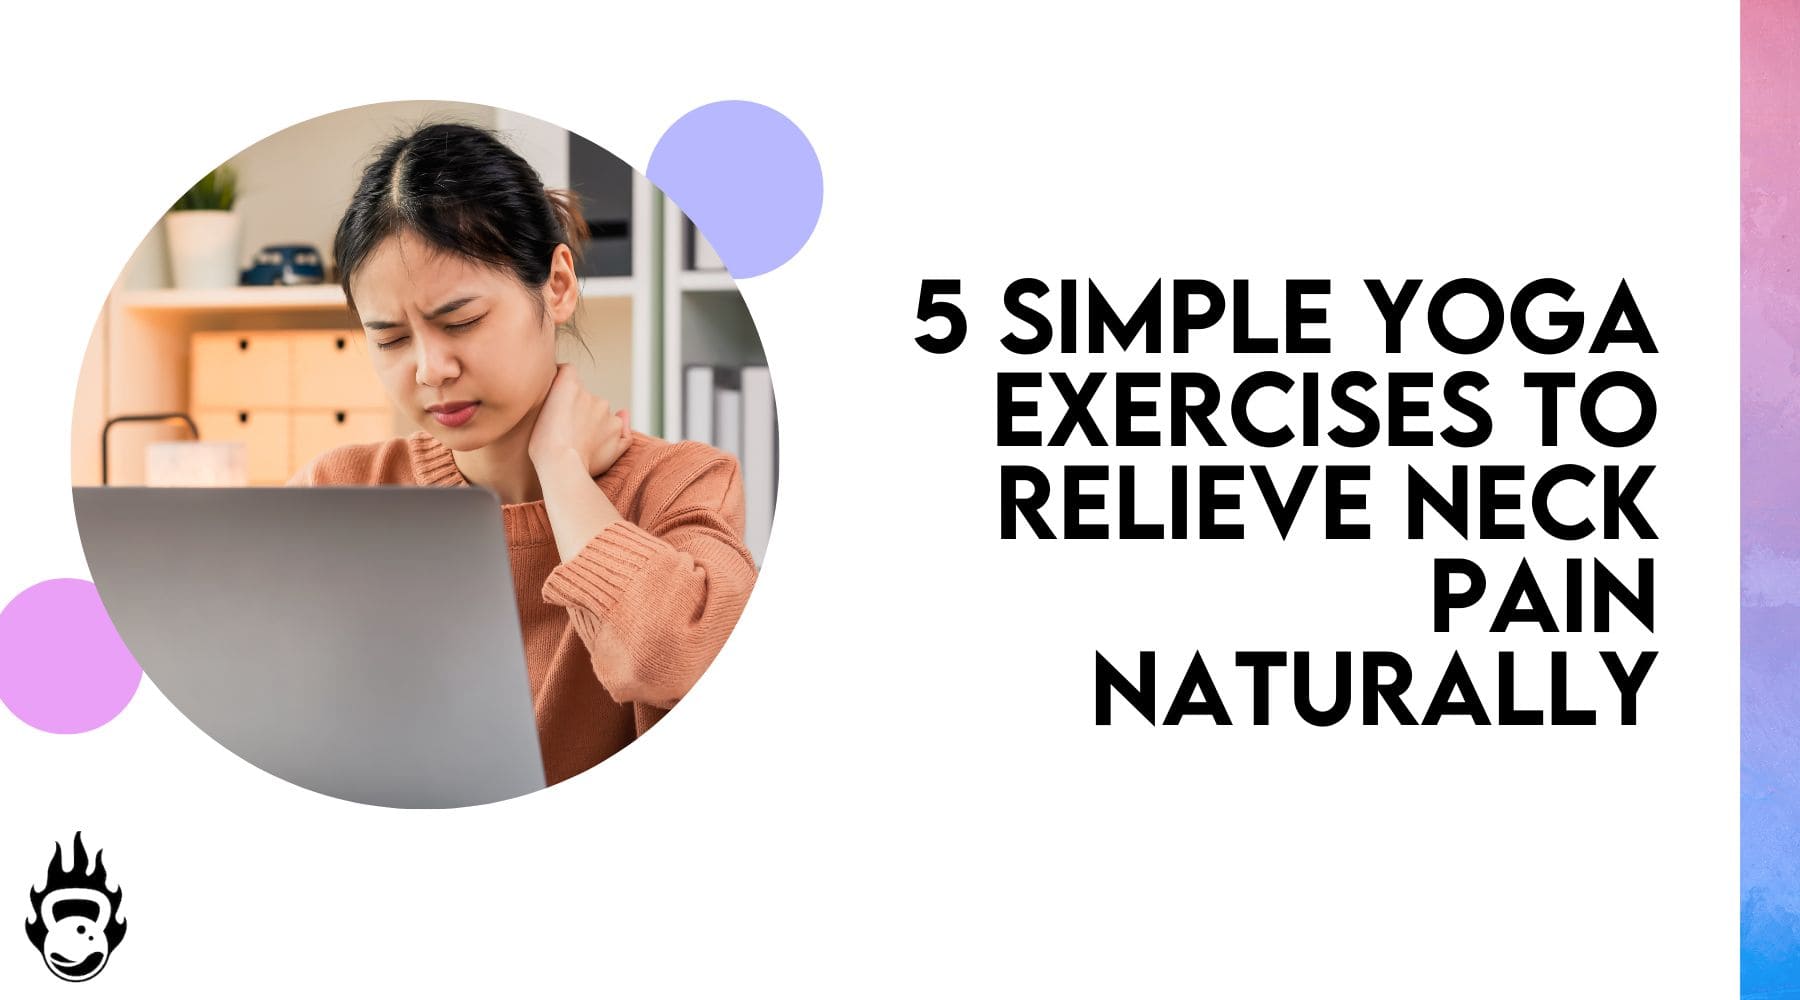 5 Simple Yoga Exercises To Relieve Neck Pain Naturally